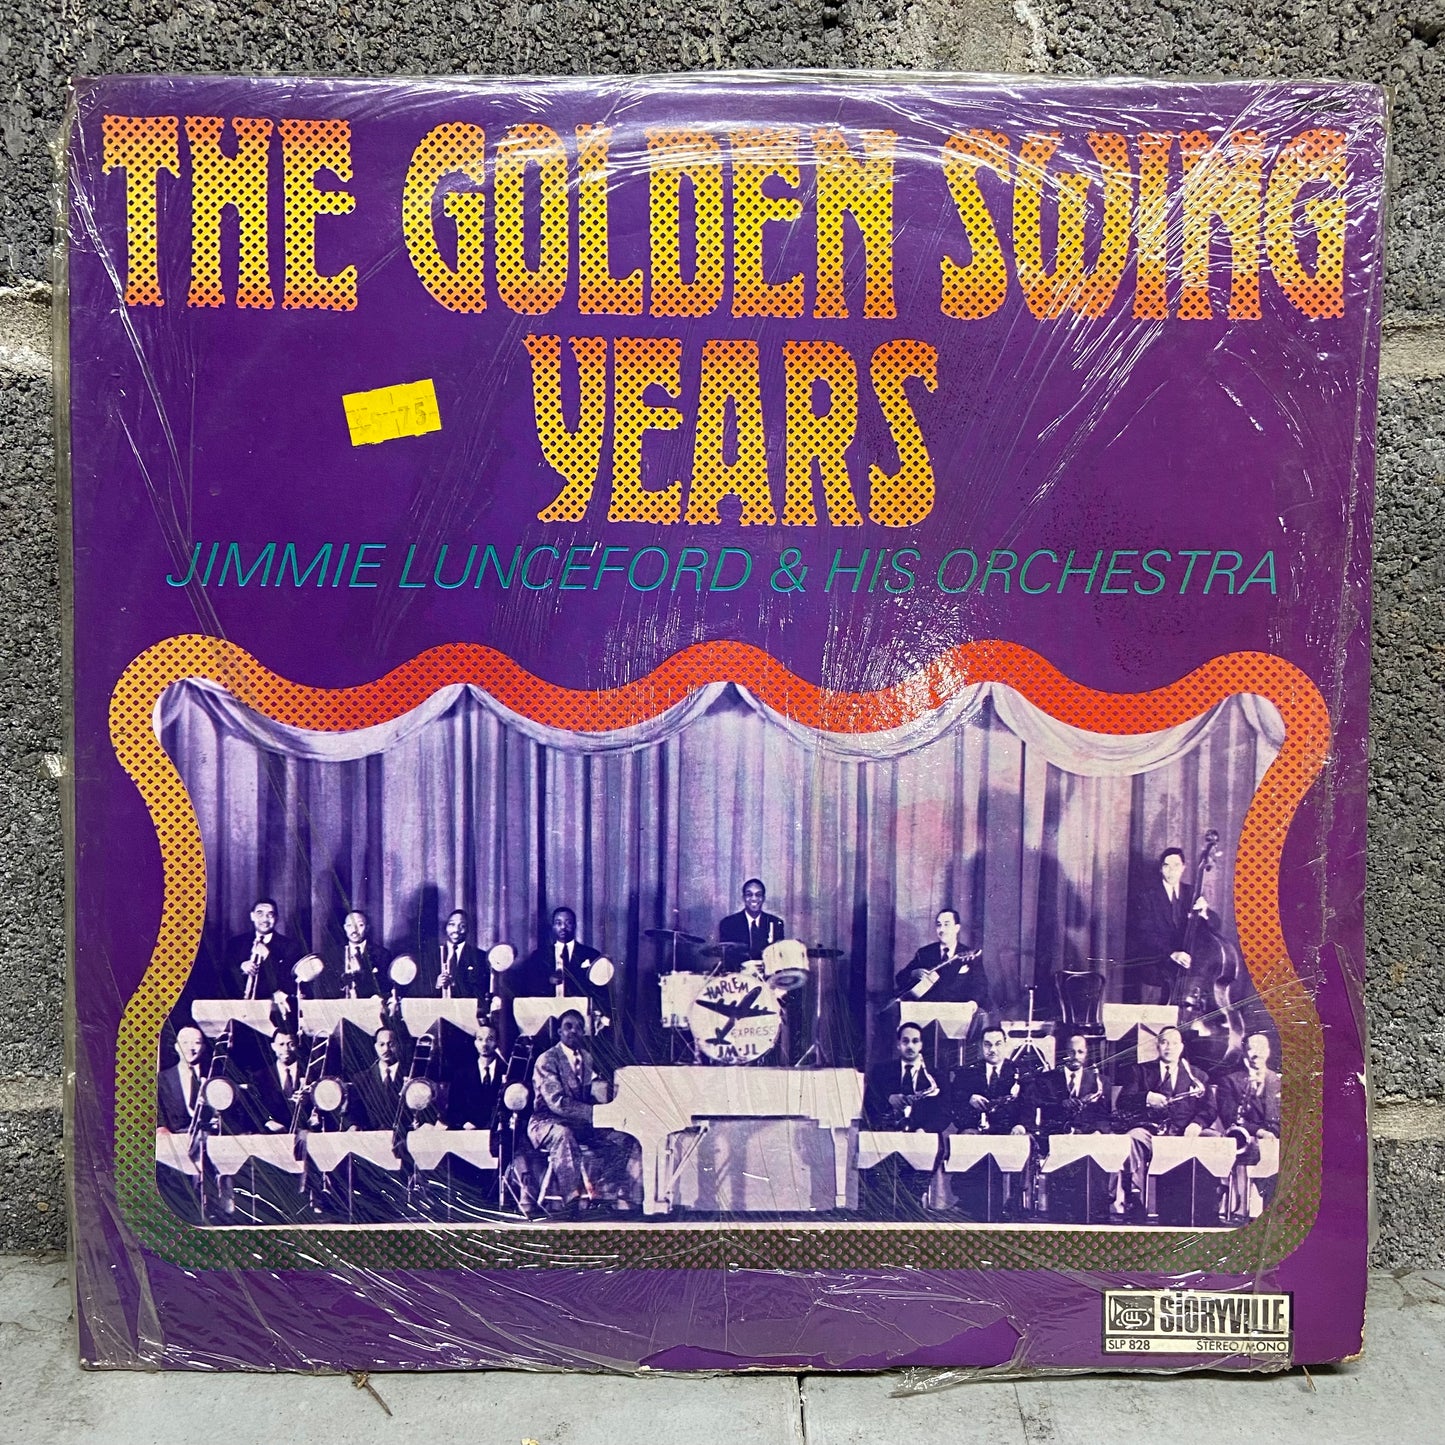 The Golden Swing Years - Jimmie Lunceford & His Orchestra